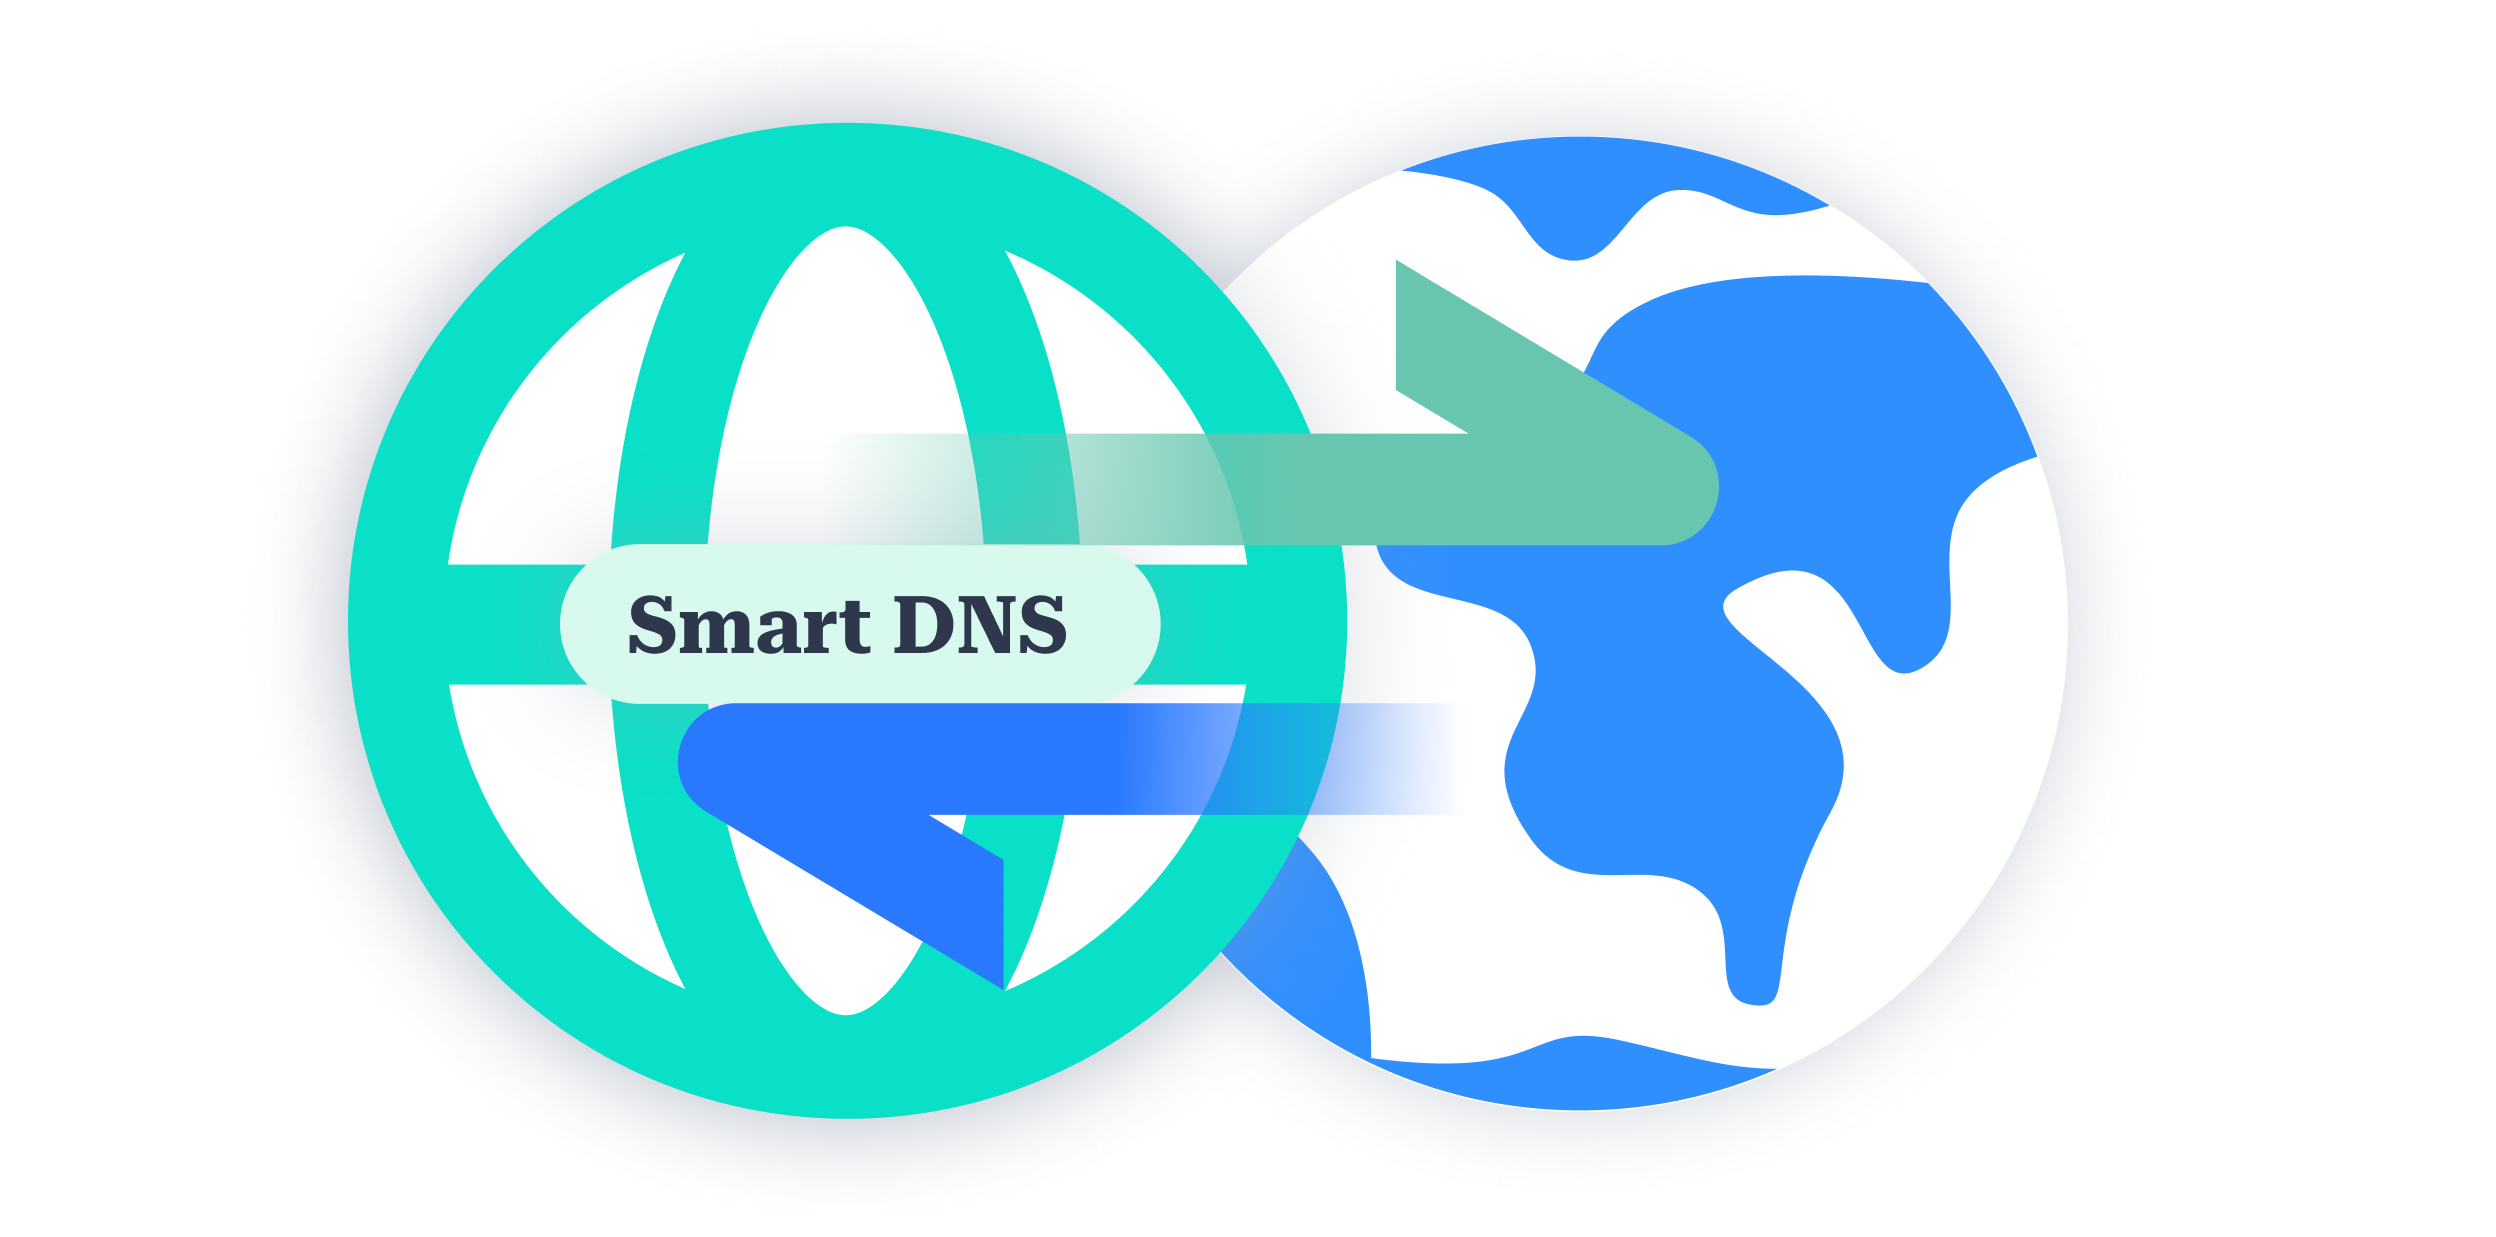 What are the benefits of using SmartDNS?